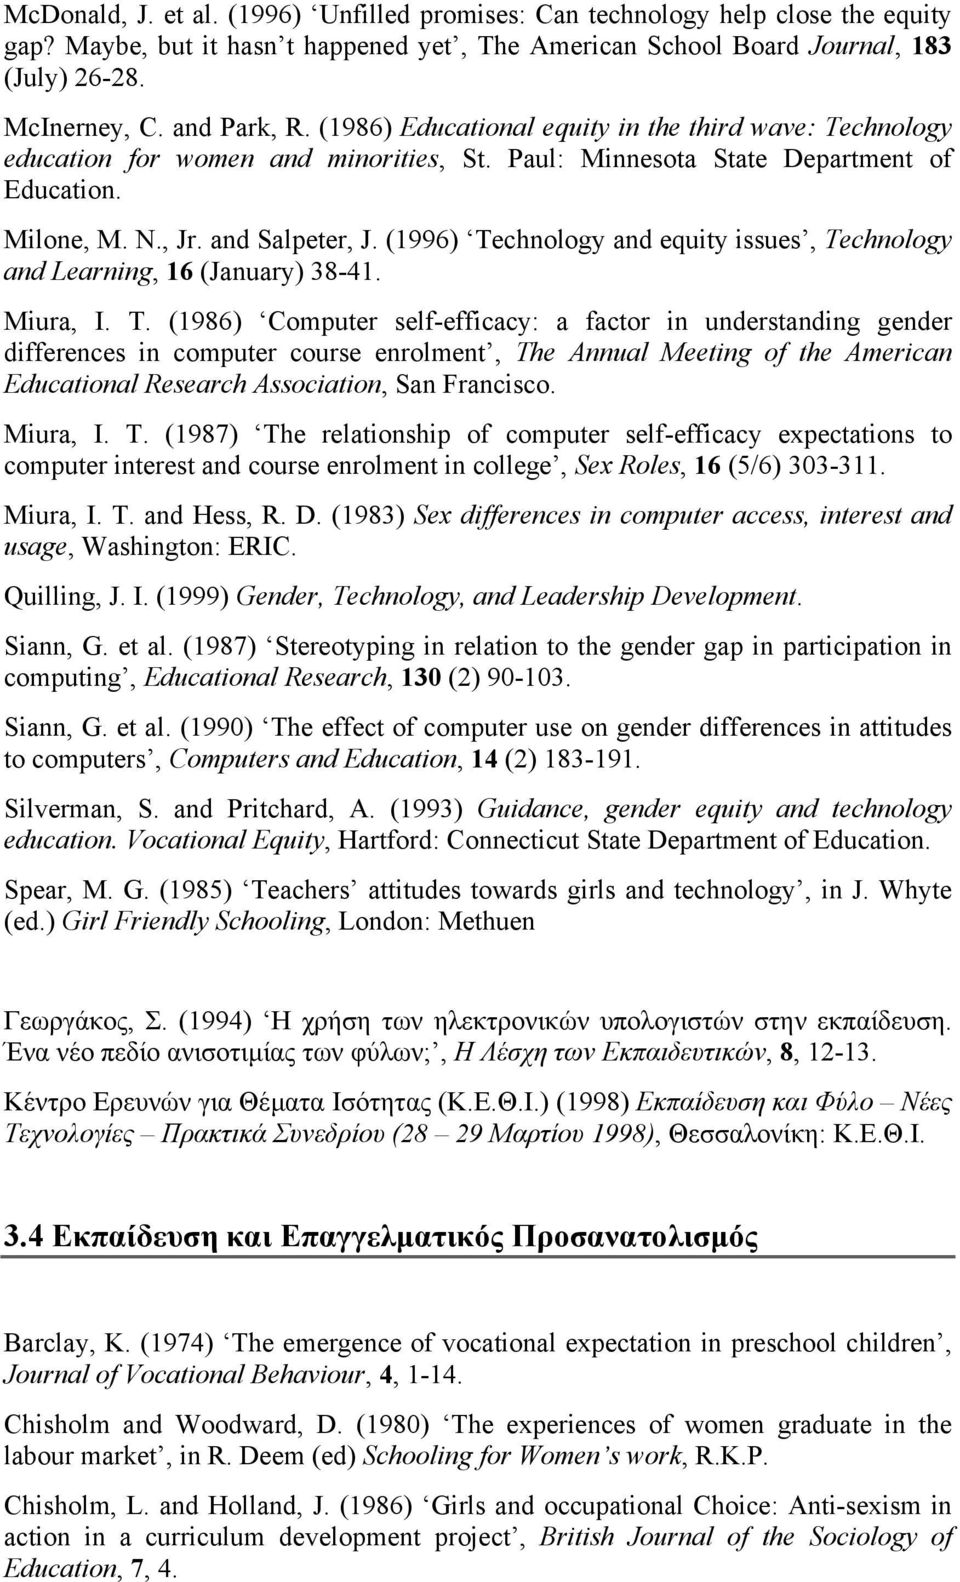 (1996) Technology and equity issues, Technology and Learning, 16 (January) 38-41. Miura, Ι. Τ.